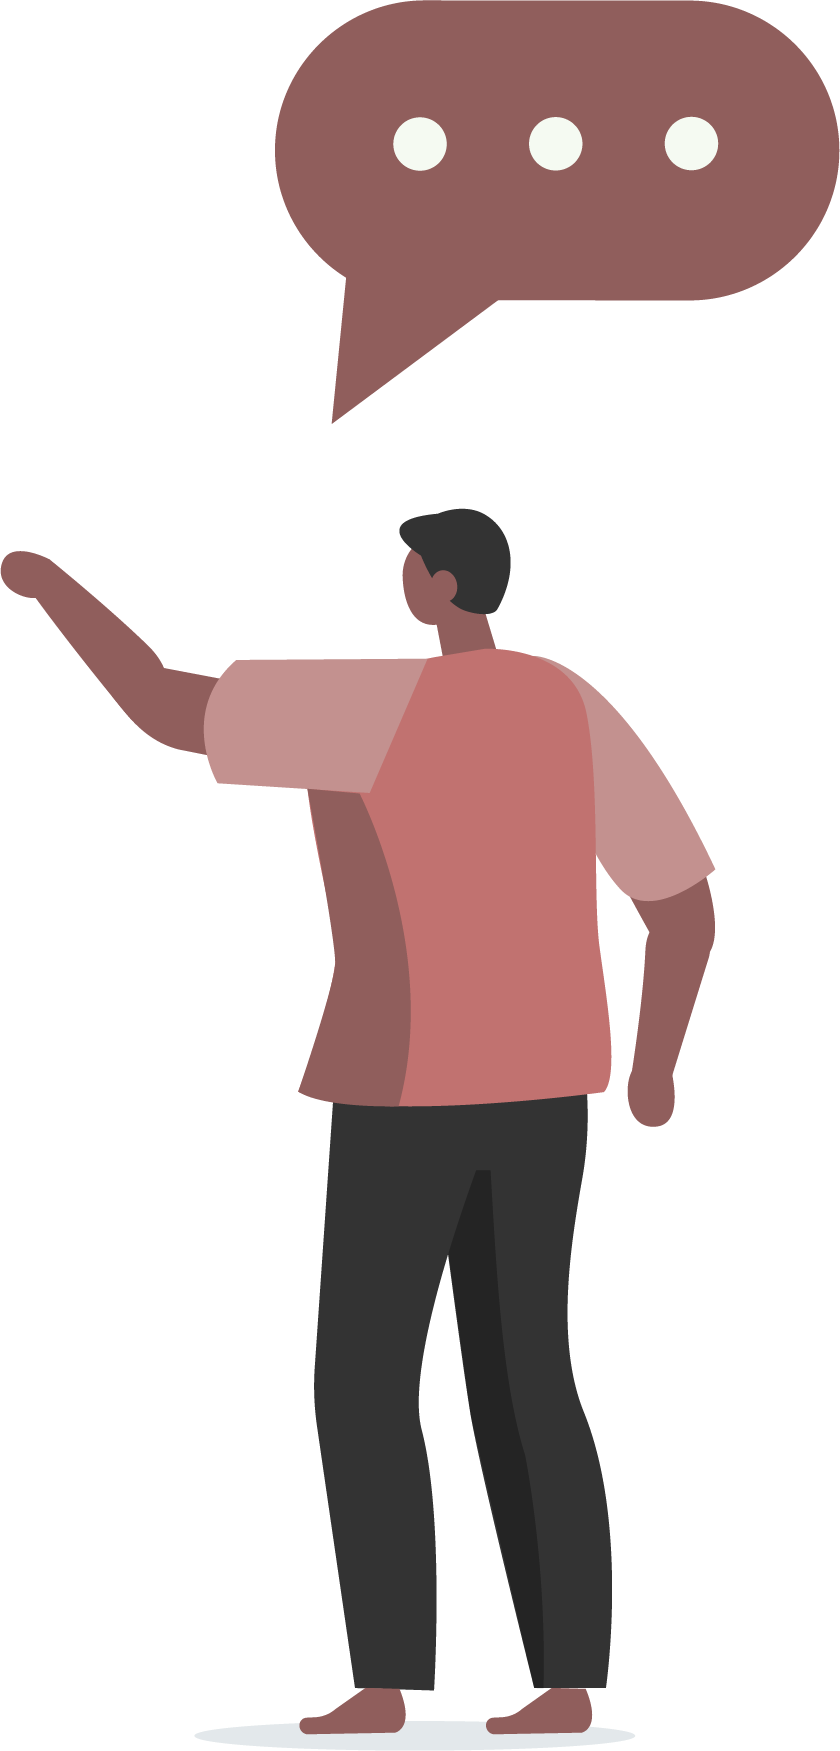 Vector illustration of a character with an arm extended and a speech bubble.